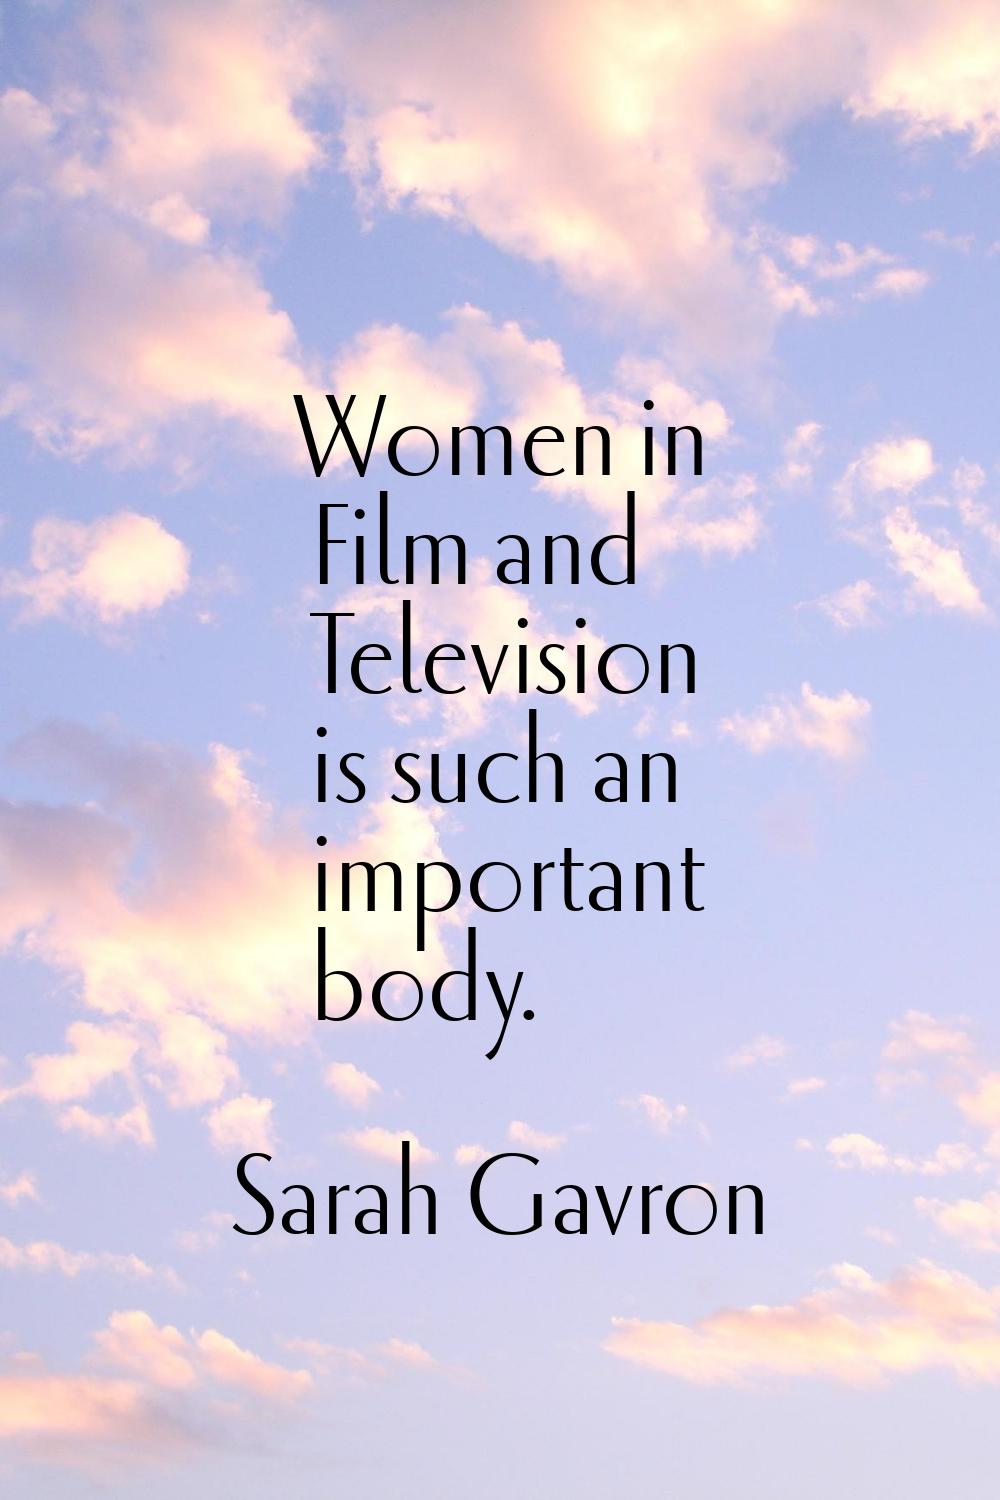 Women in Film and Television is such an important body.